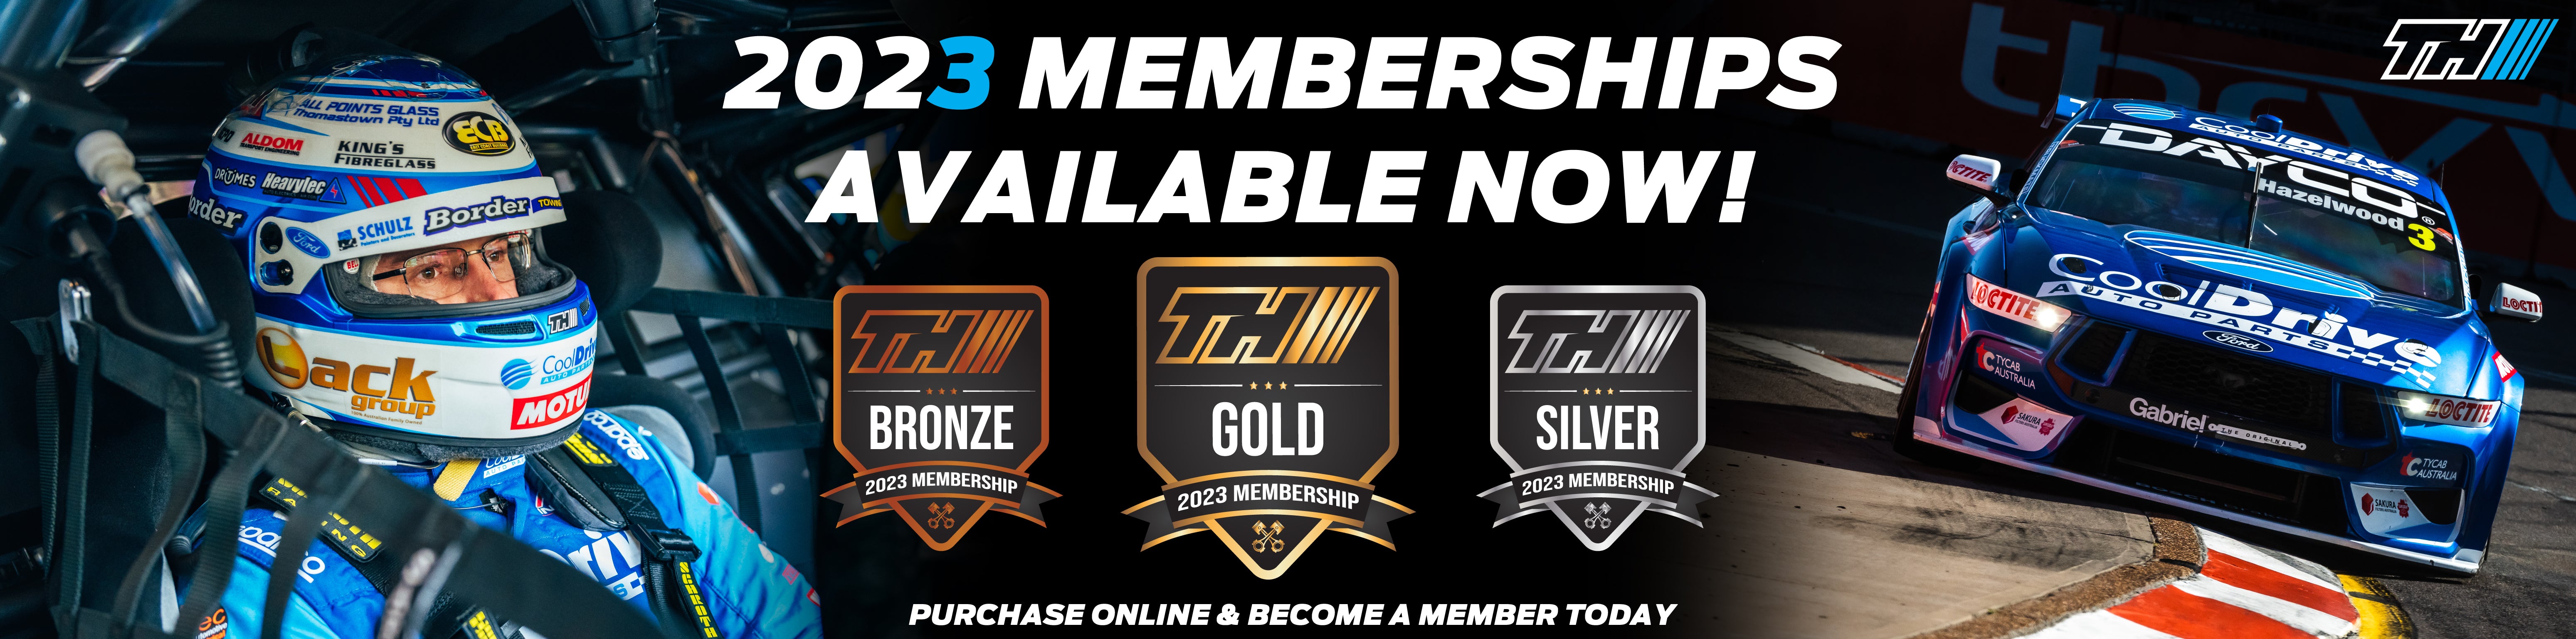 2022 Memberships Now Available